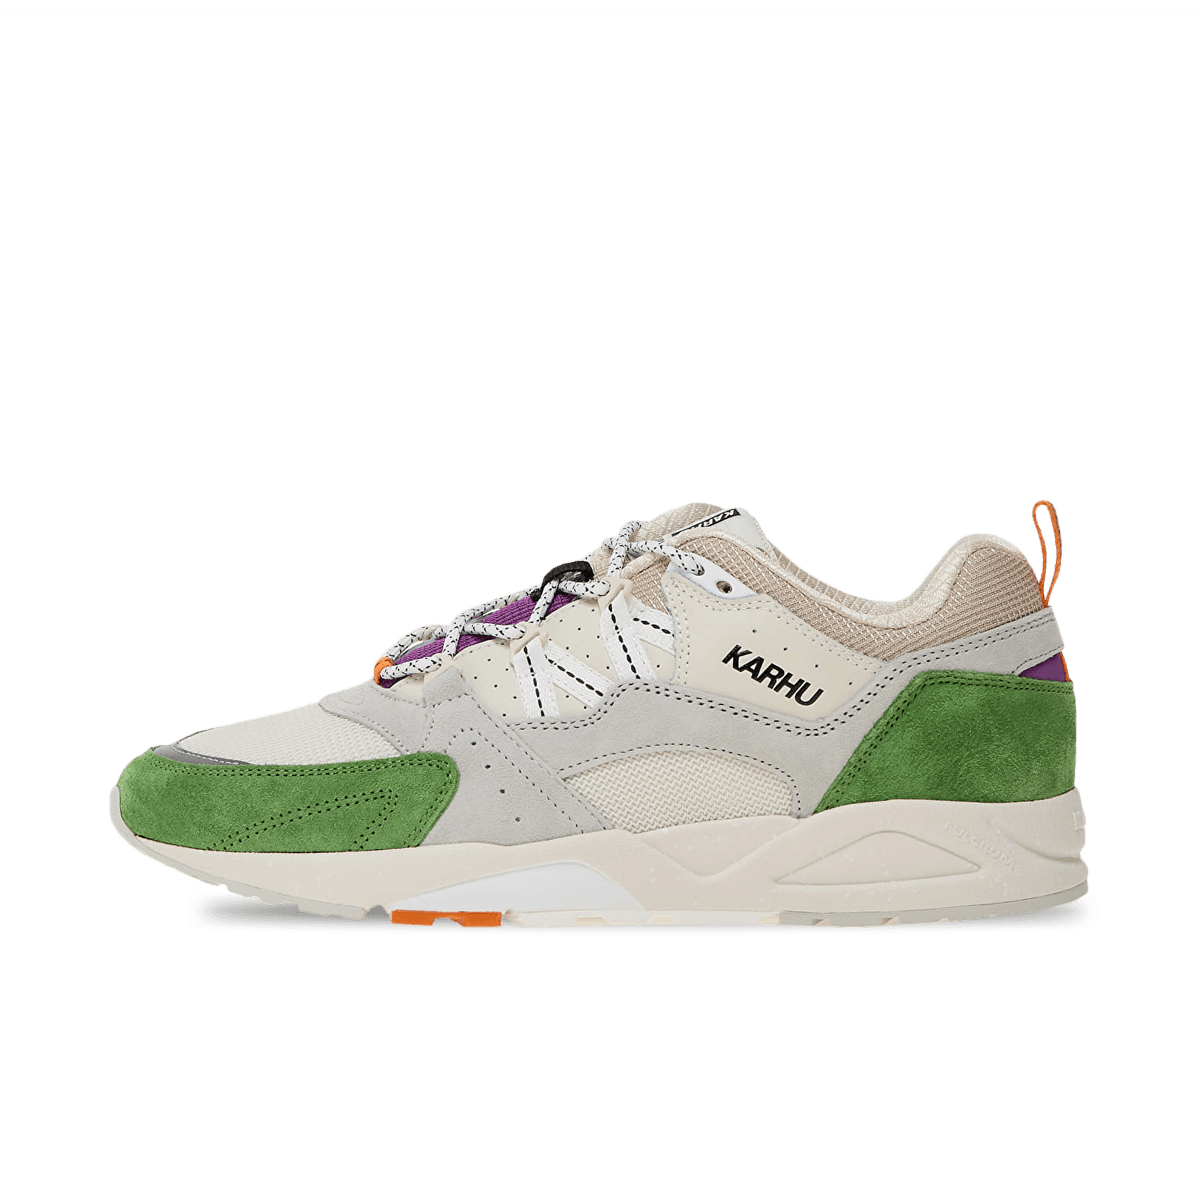 Karhu Fusion 2.0 'Piquant Green' - Flow State Pack F804165